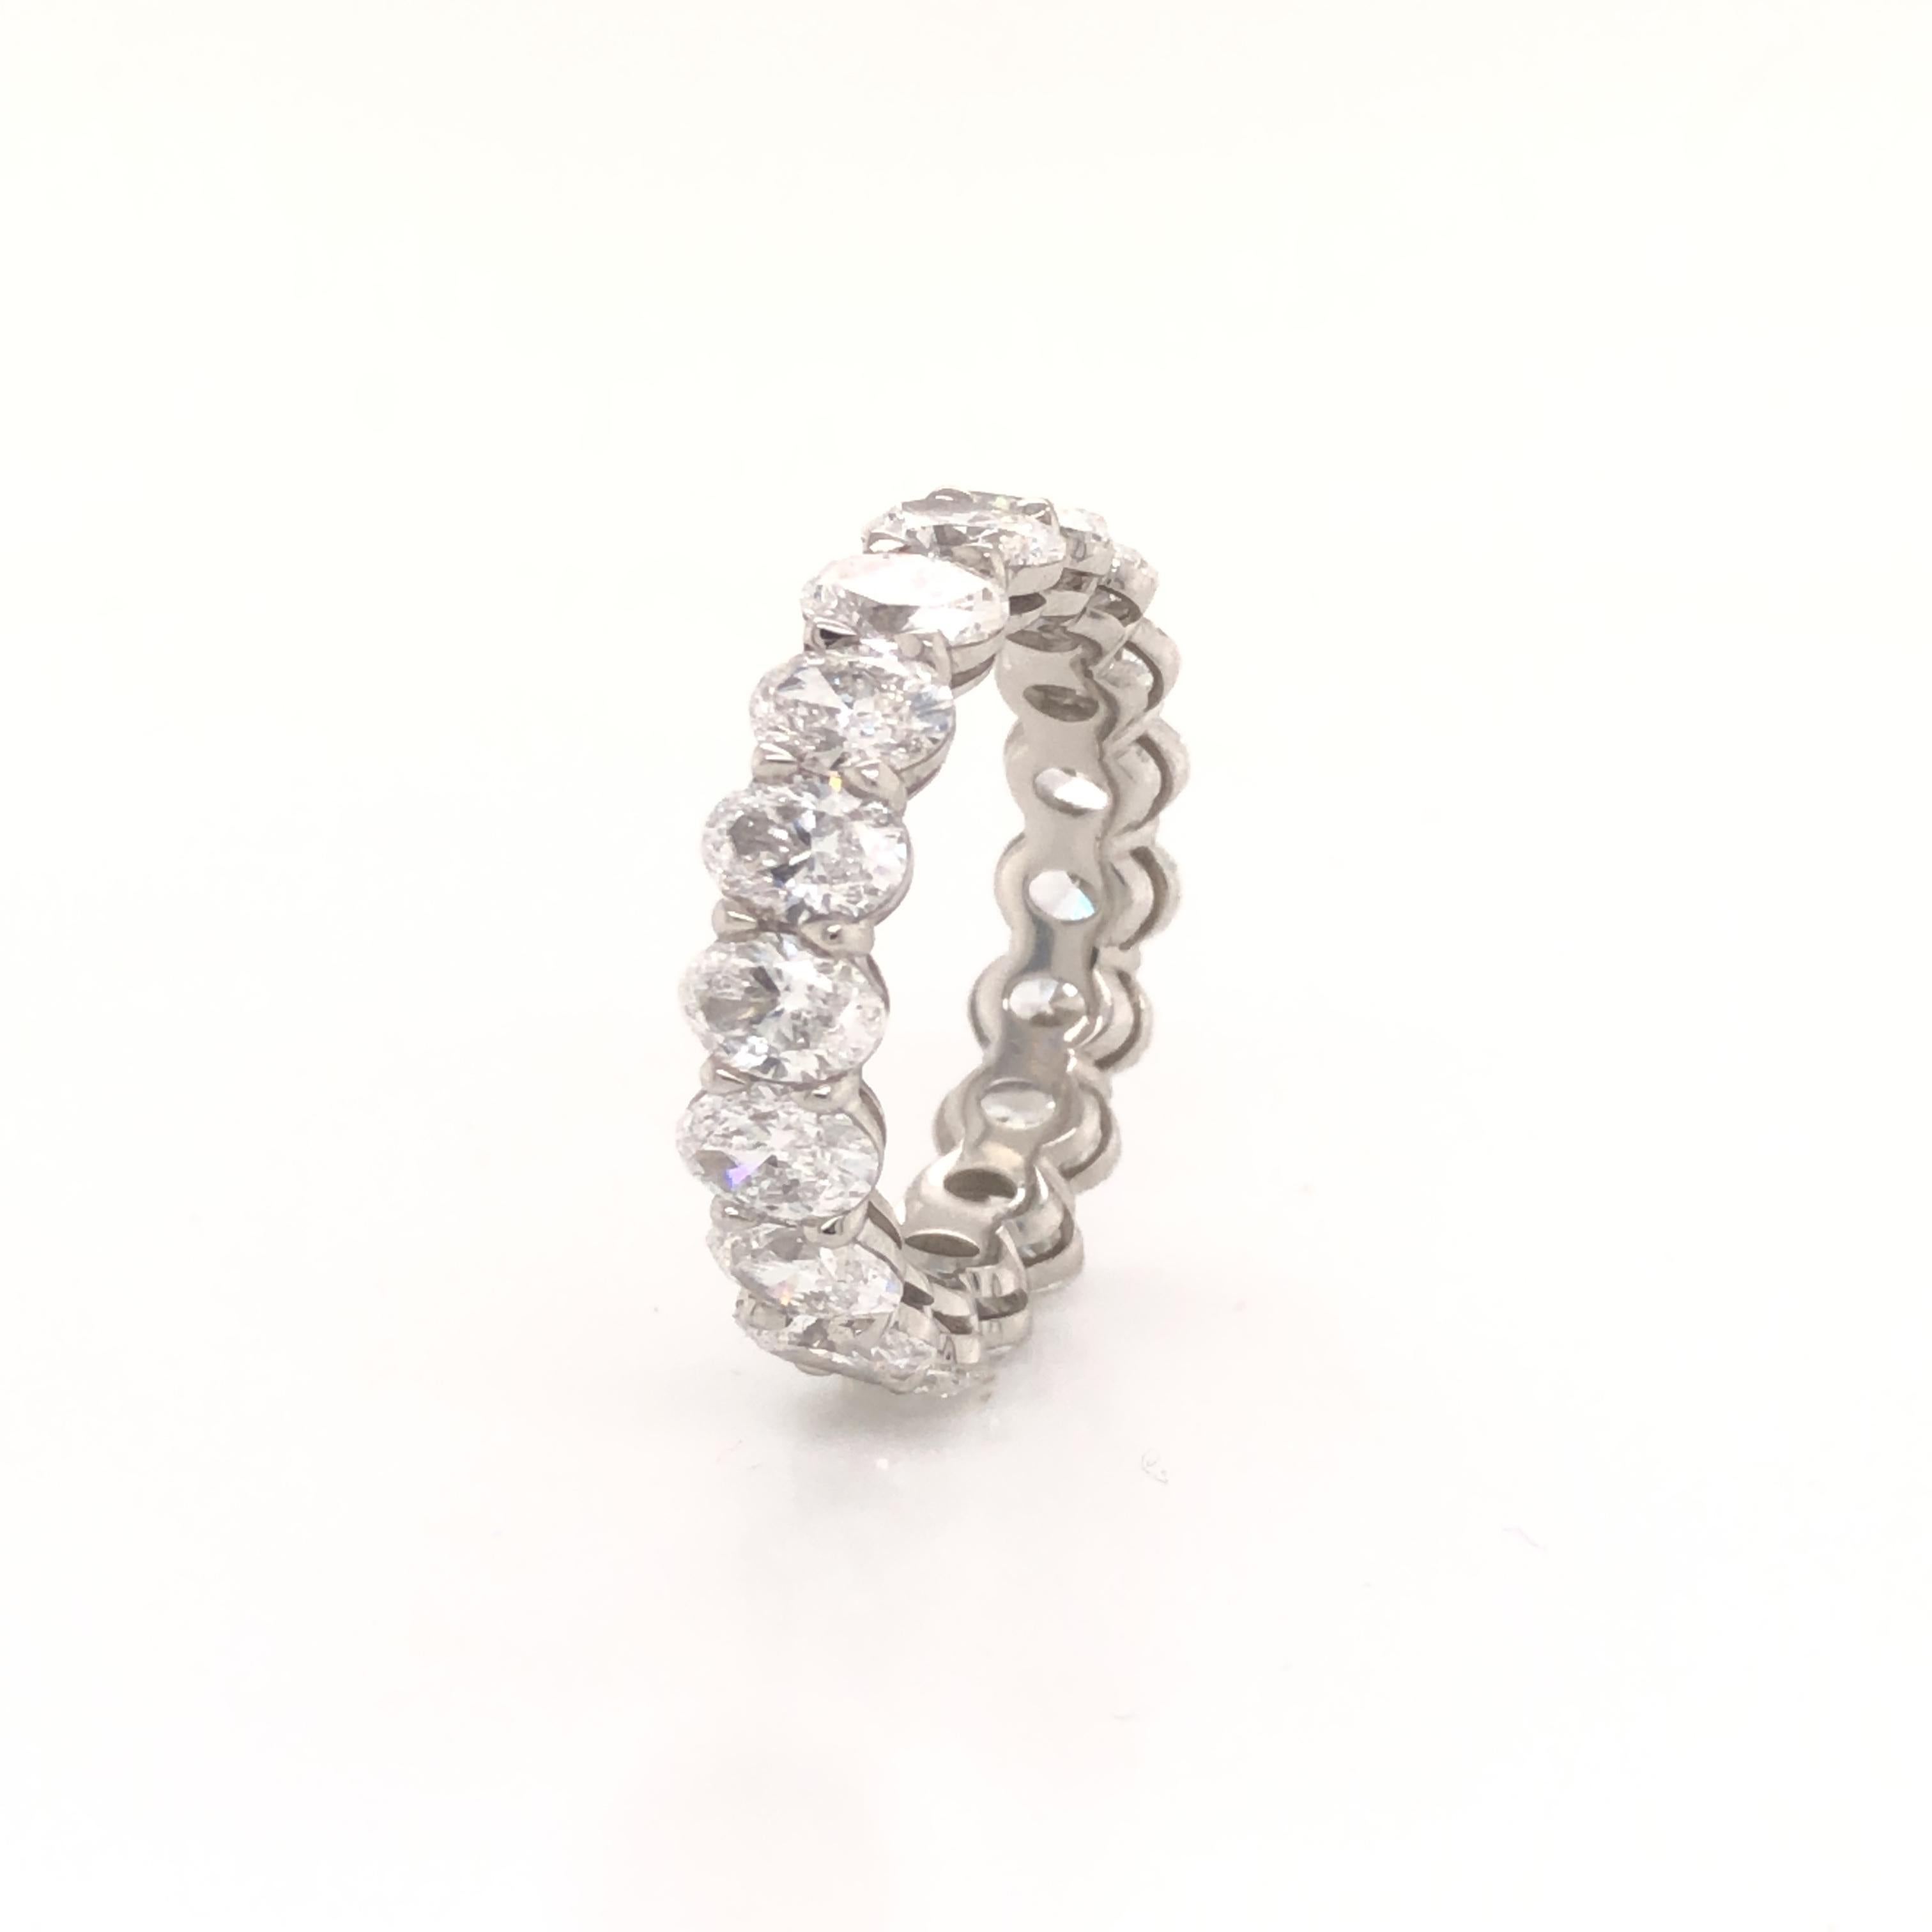 Amazing eternity band crafted in platinum. This gorgeous eternity band is set with oval cut diamonds 18 in total. The ring displays a 5.58 tcw. Each diamond in this ring weigh 0.30-0.35 ct, all diamonds are VVS- VS and shows F-G color. The ring is